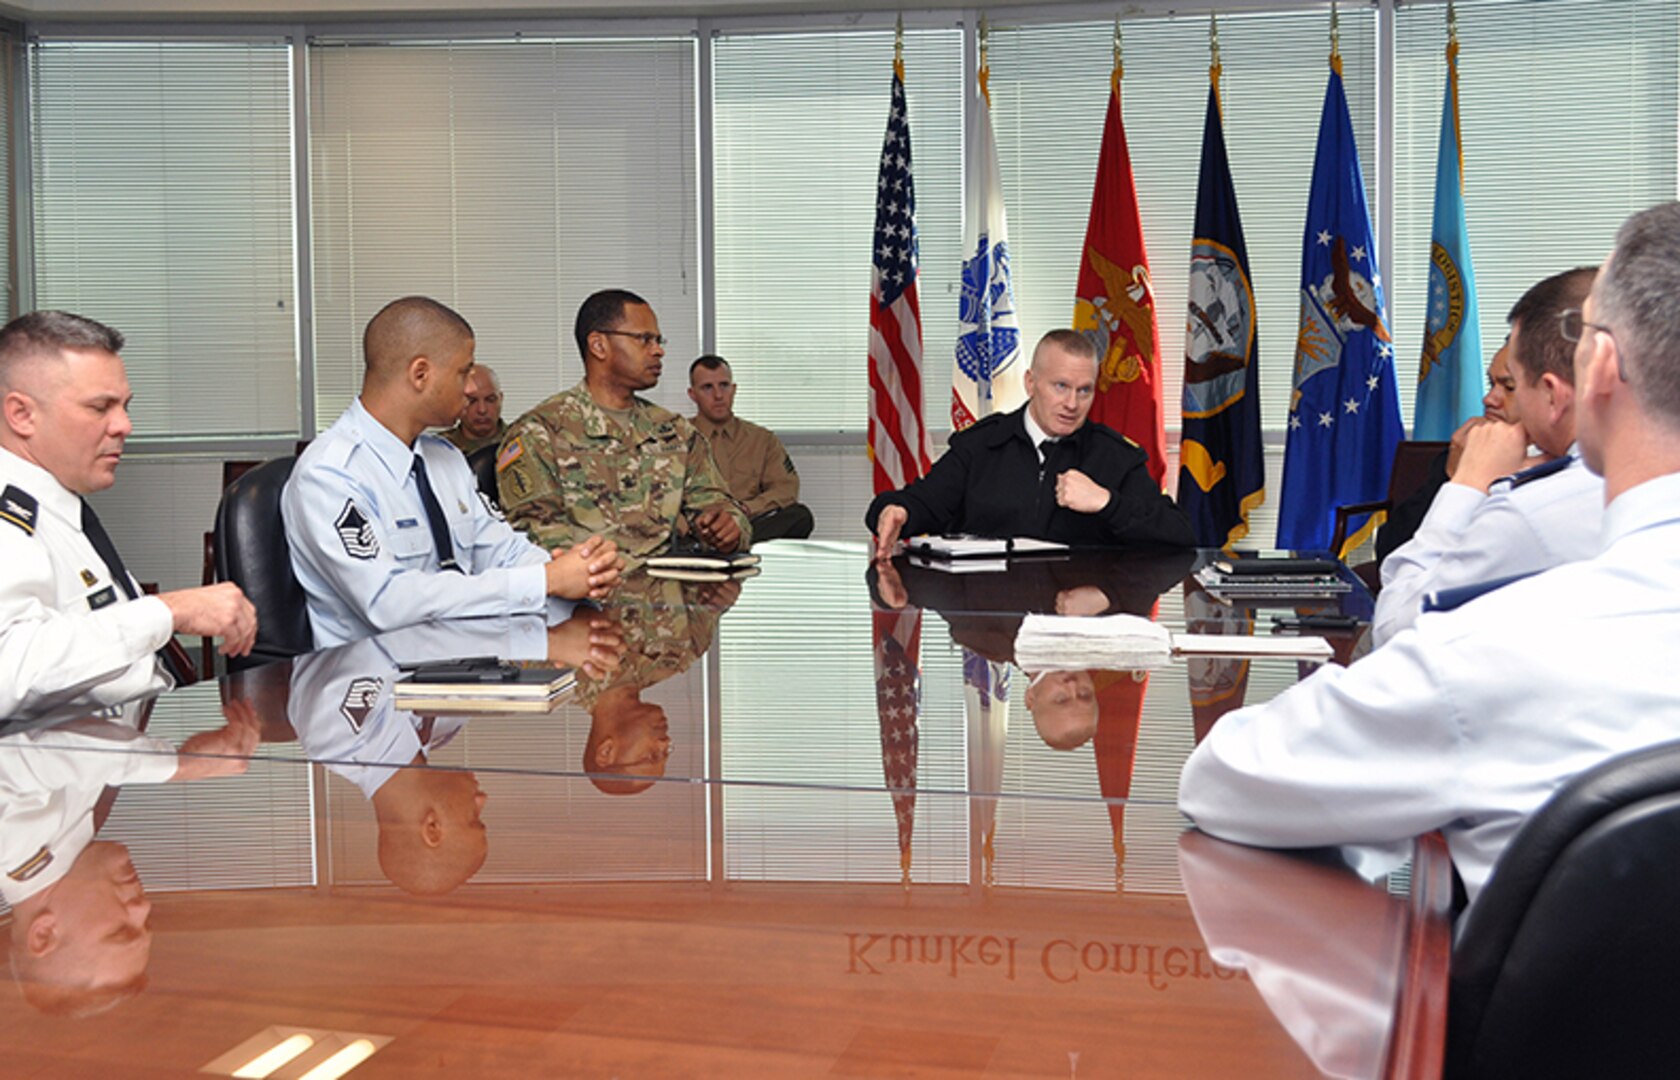 Army Command Sgt. Maj. John Wayne Troxell, the senior enlisted advisor to the Chairman of the Joint Chiefs of Staff, talks to DLA Energy personnel during a meeting at the McNamara Headquarters Complex in Fort Belvoir, Virginia, March 8.